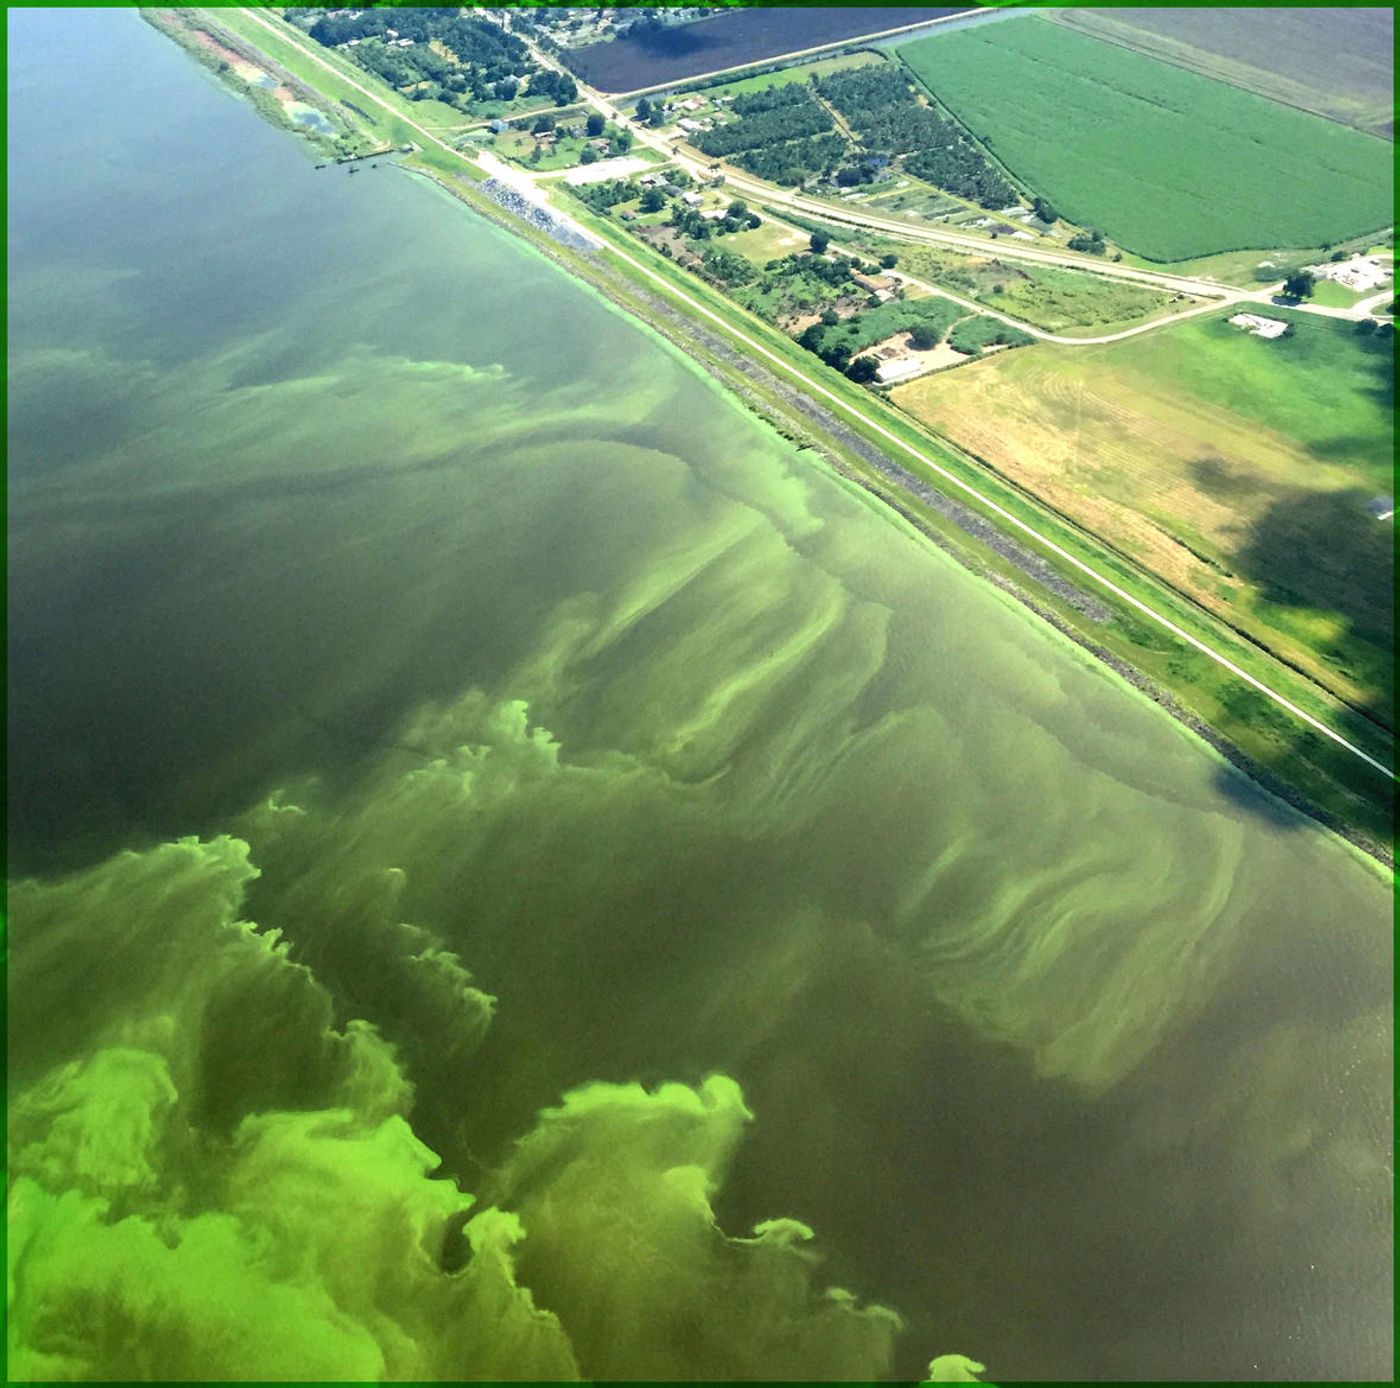 A toxic algal bloom caused by agriculture runoff. Photo: USGS